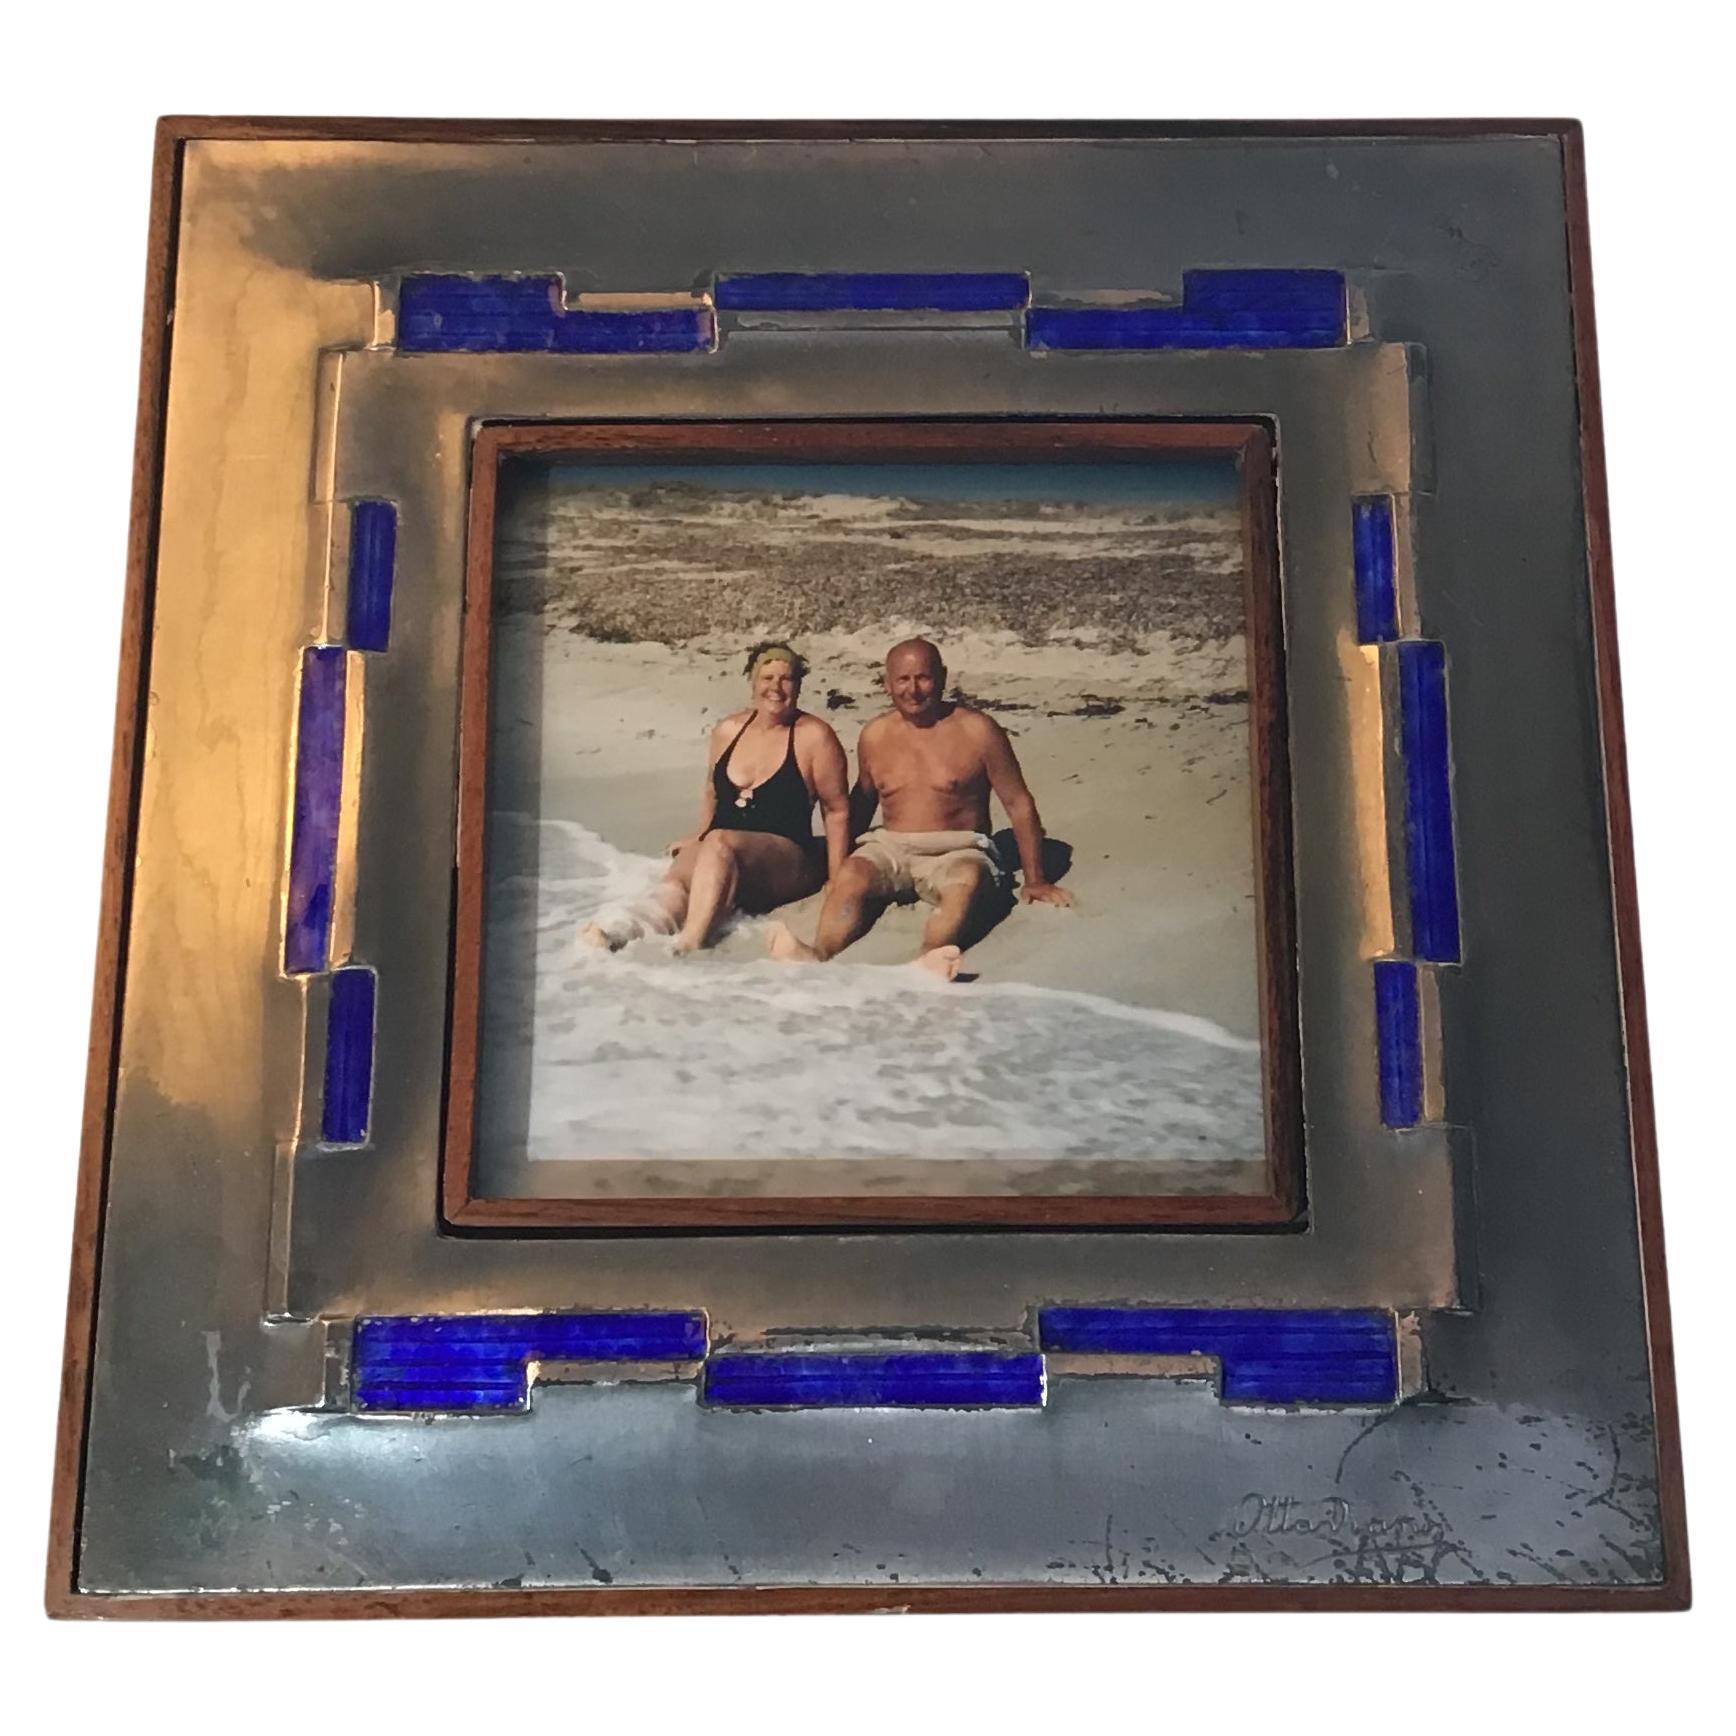 Ottaviani Pucture Frame 925 Silver Enamelled Copper Wood 1960 Italy For Sale